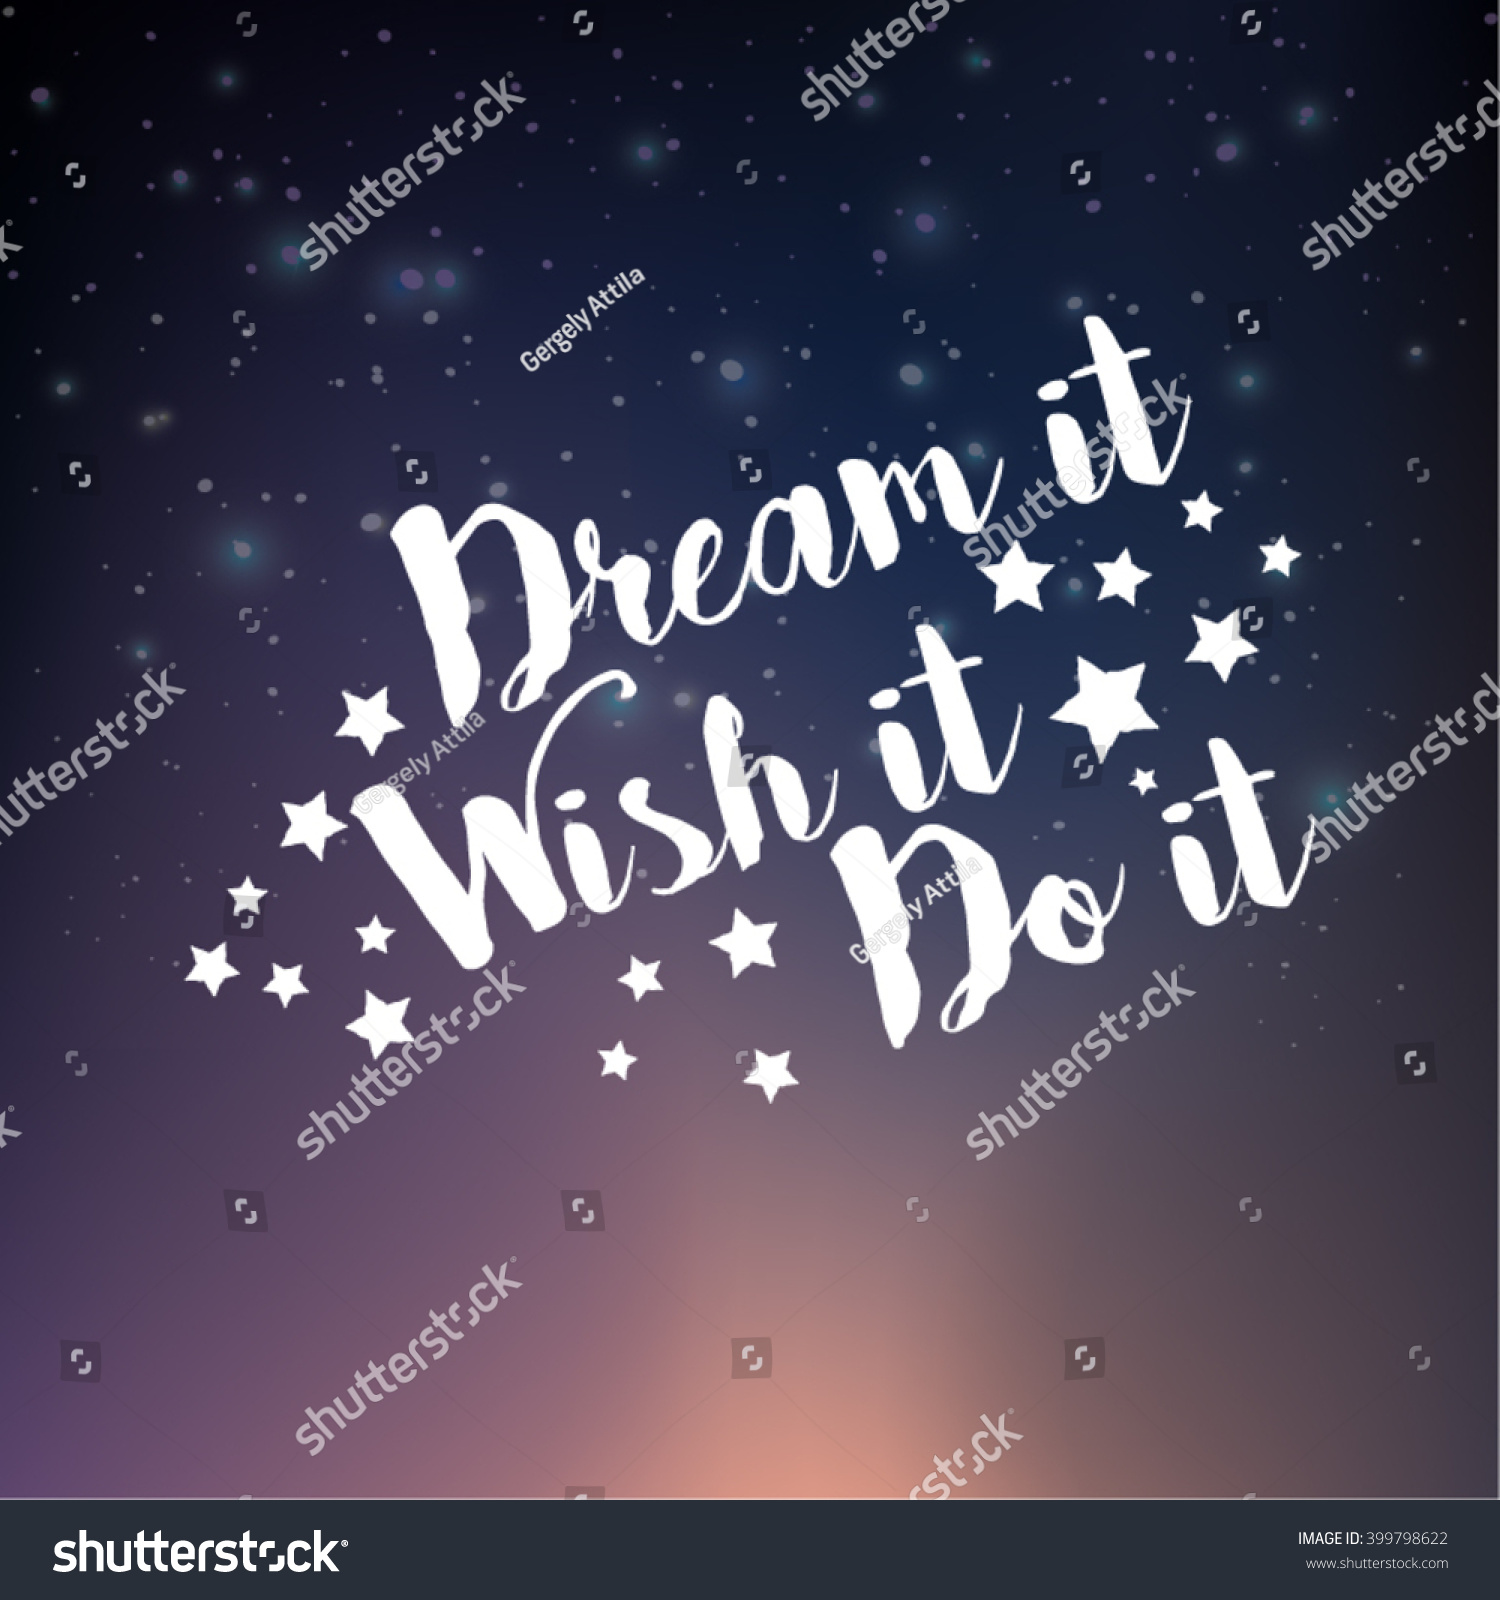 Magical Starry Night Sky With Dream It Wish It Do It. Stock Vector ...